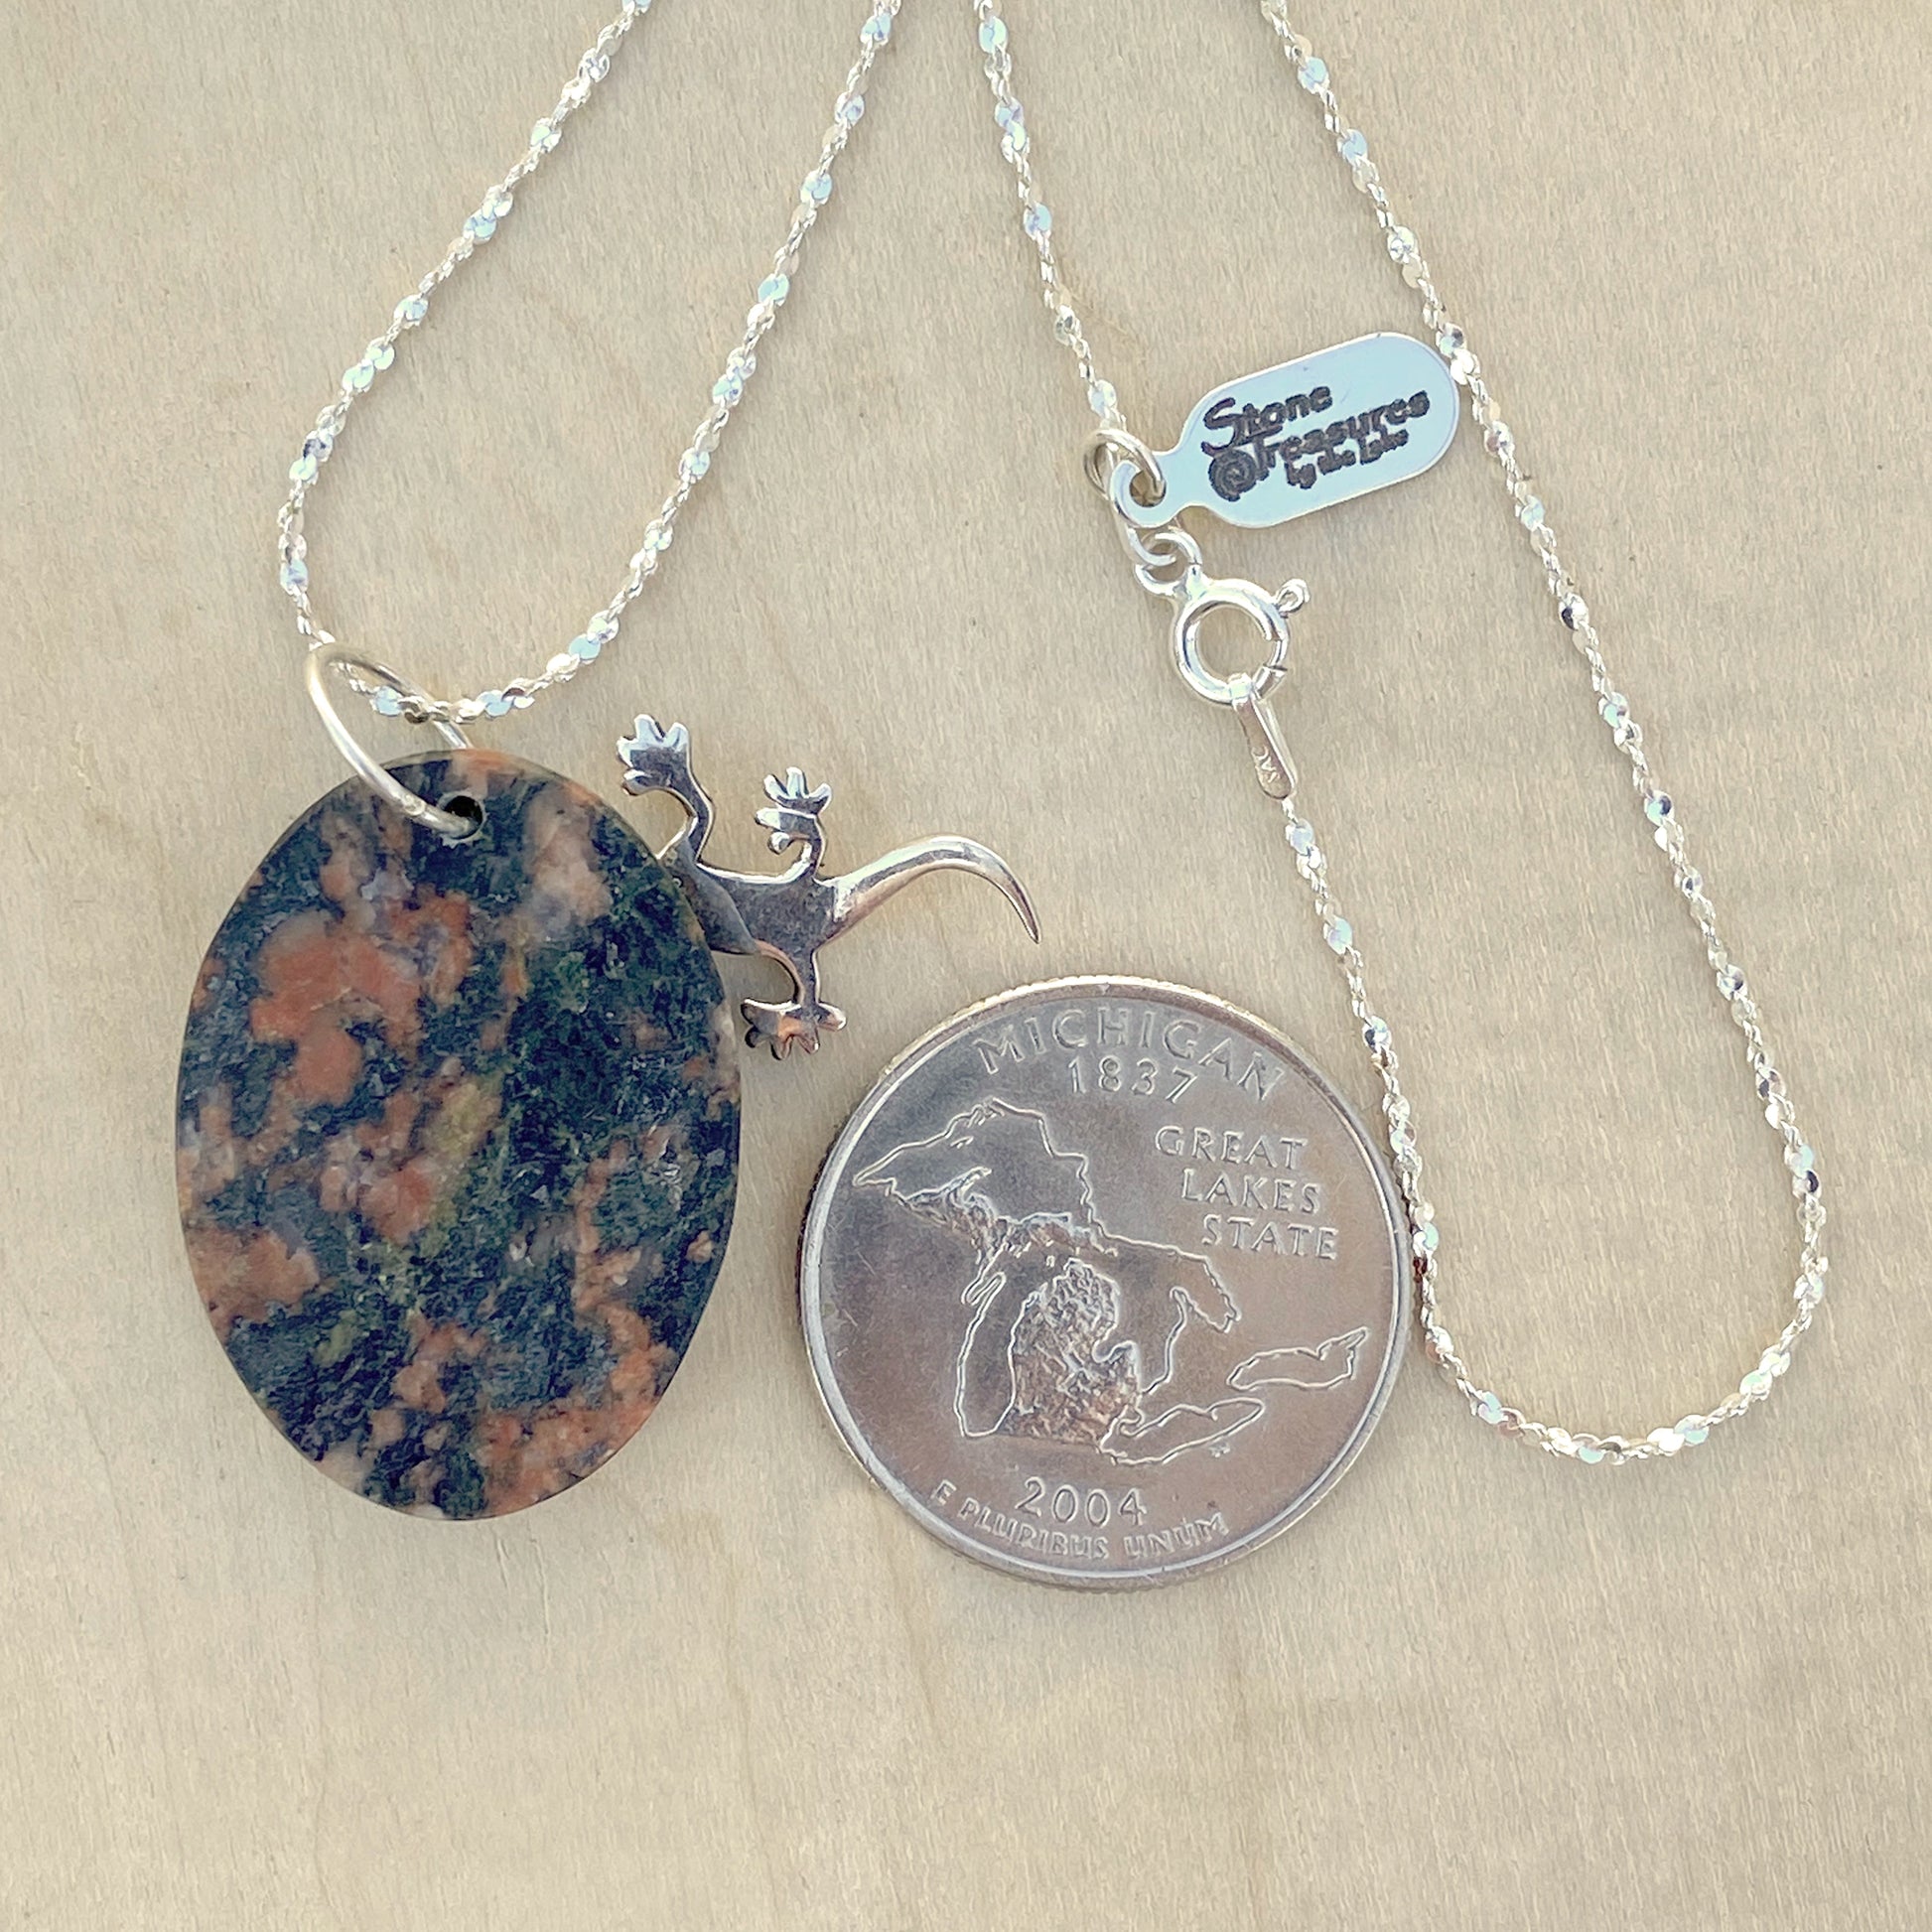 Granite with Lizard Charm Pendant Necklace - Stone Treasures by the Lake